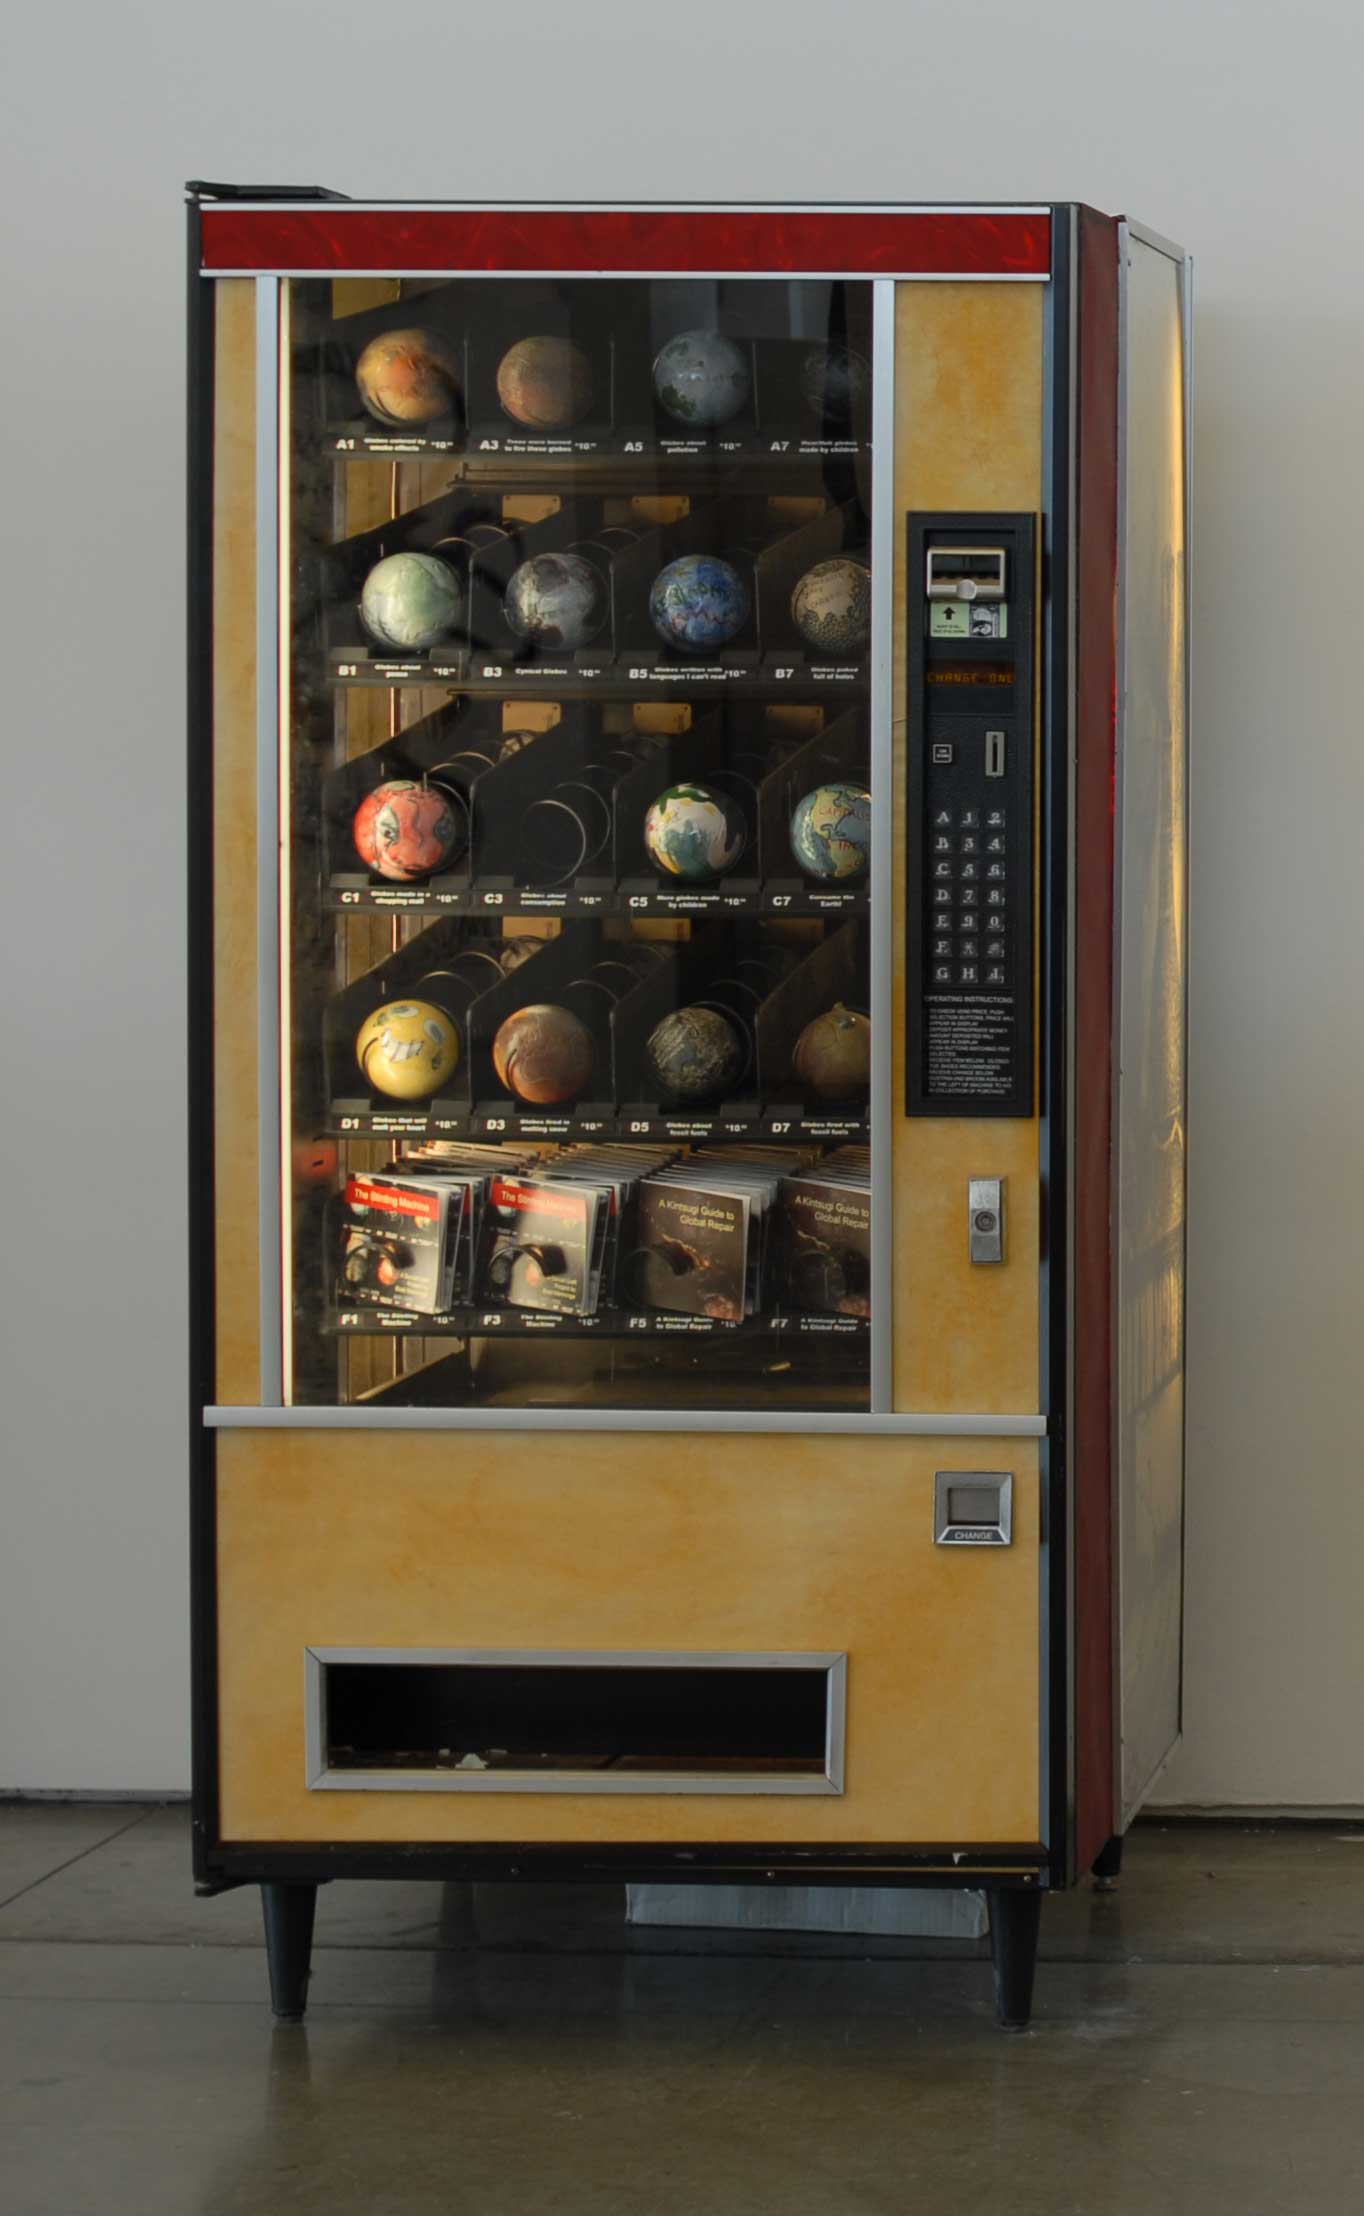  The vending machine was designed to drop and break handmade ceramic globes if they were purchased. 